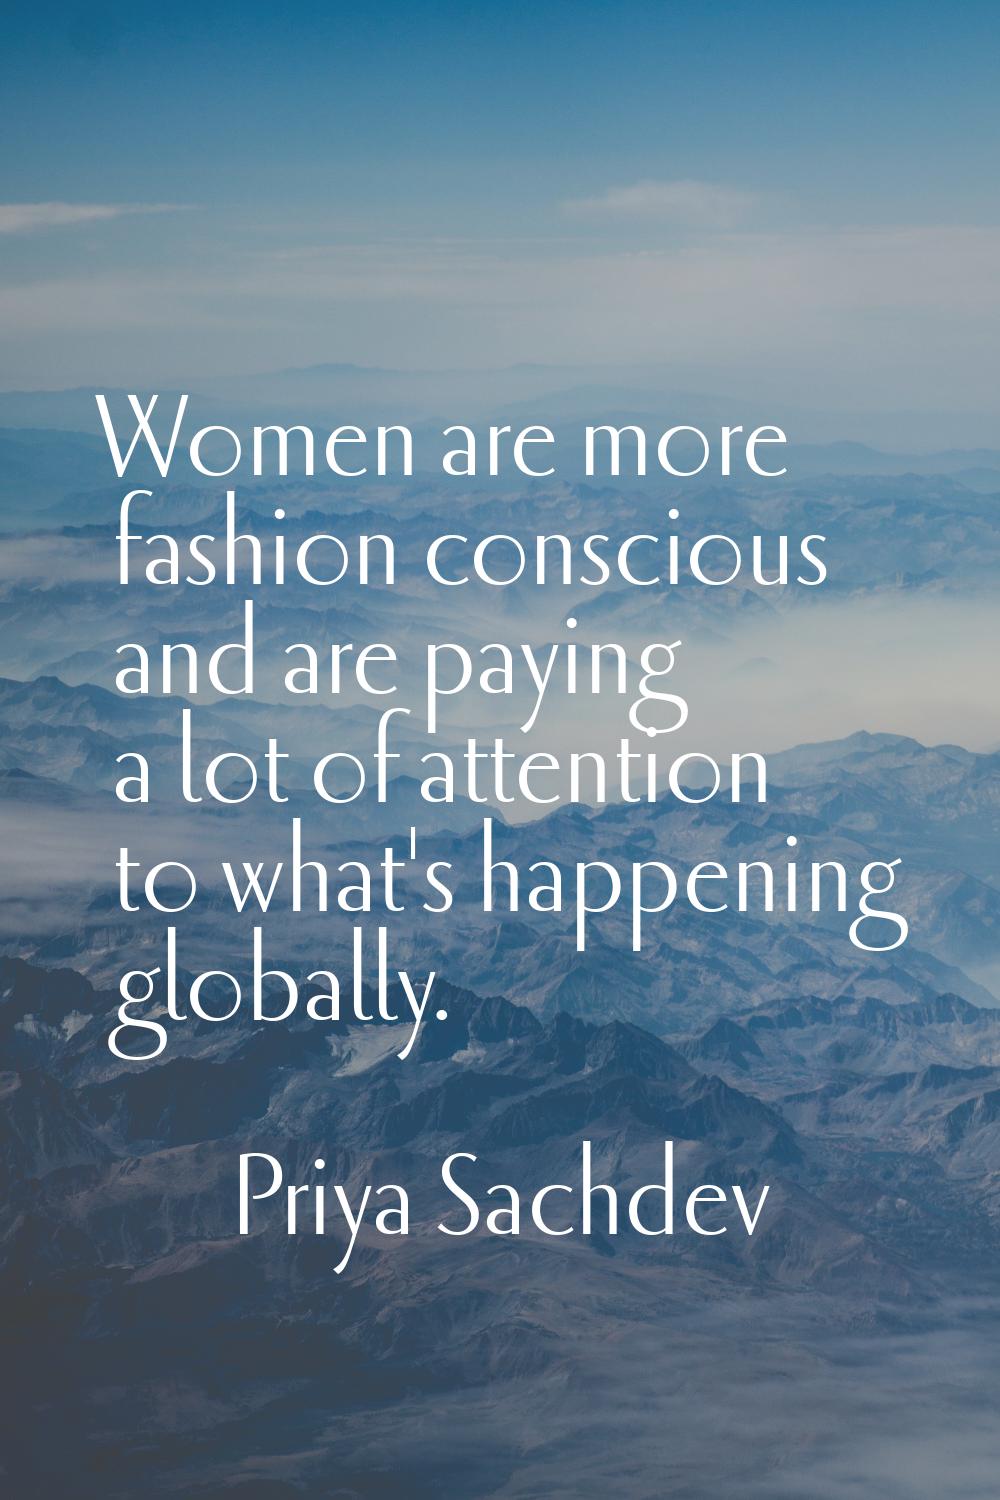 Women are more fashion conscious and are paying a lot of attention to what's happening globally.